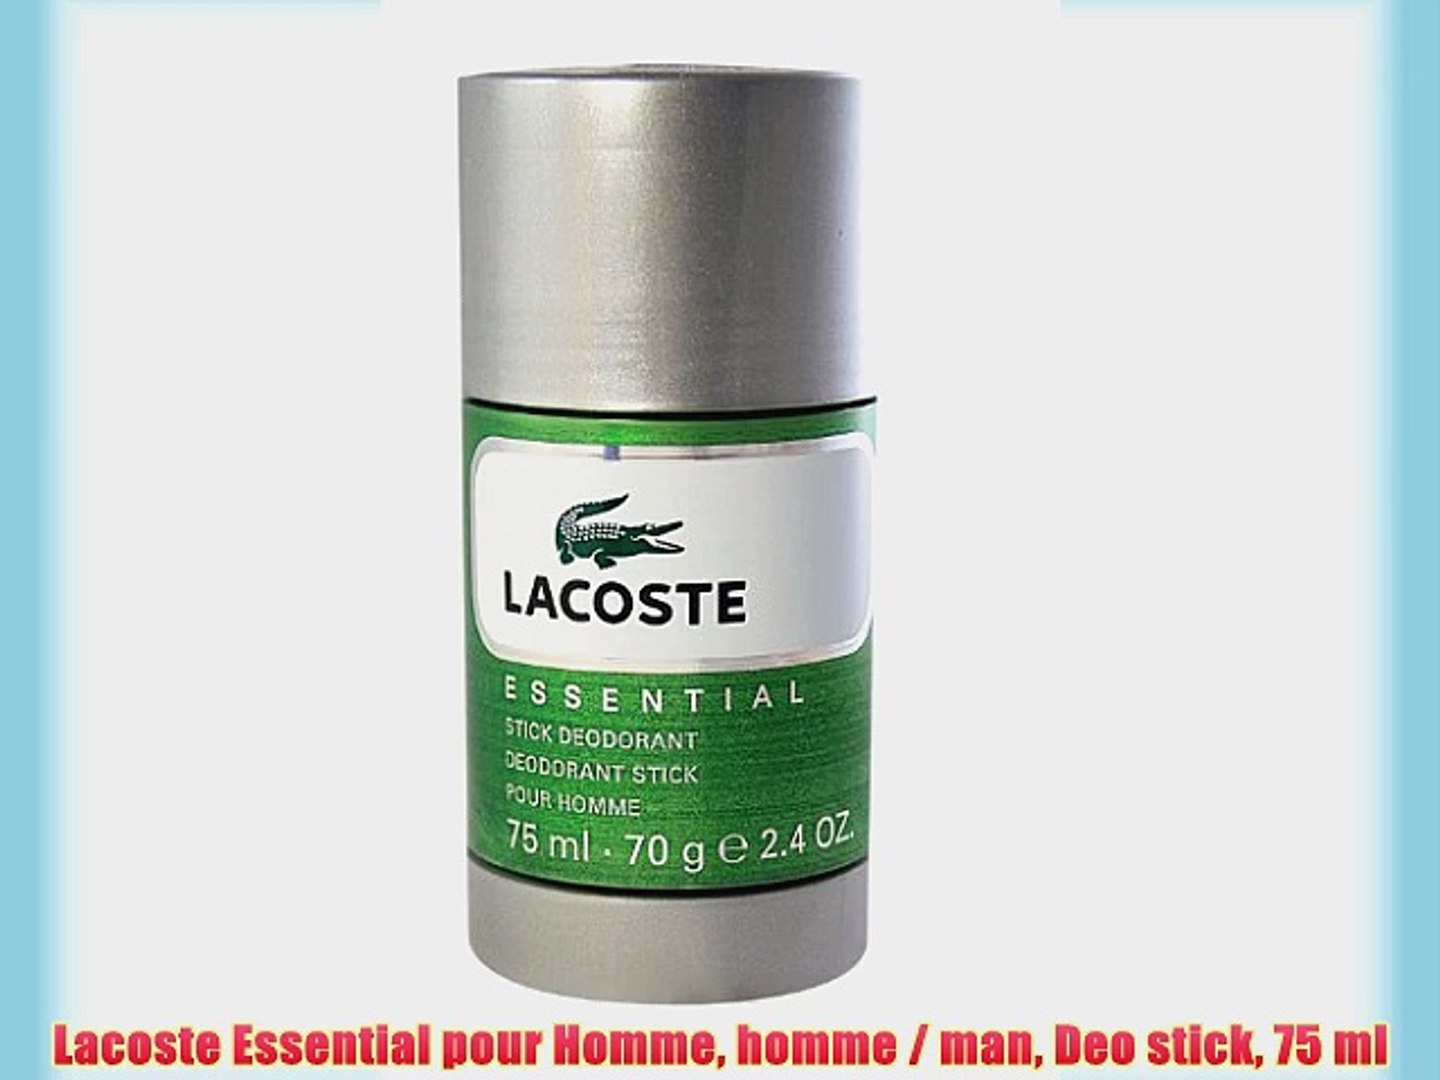 Lacoste Essential pour Homme homme / Deo stick 75 ml - video Dailymotion